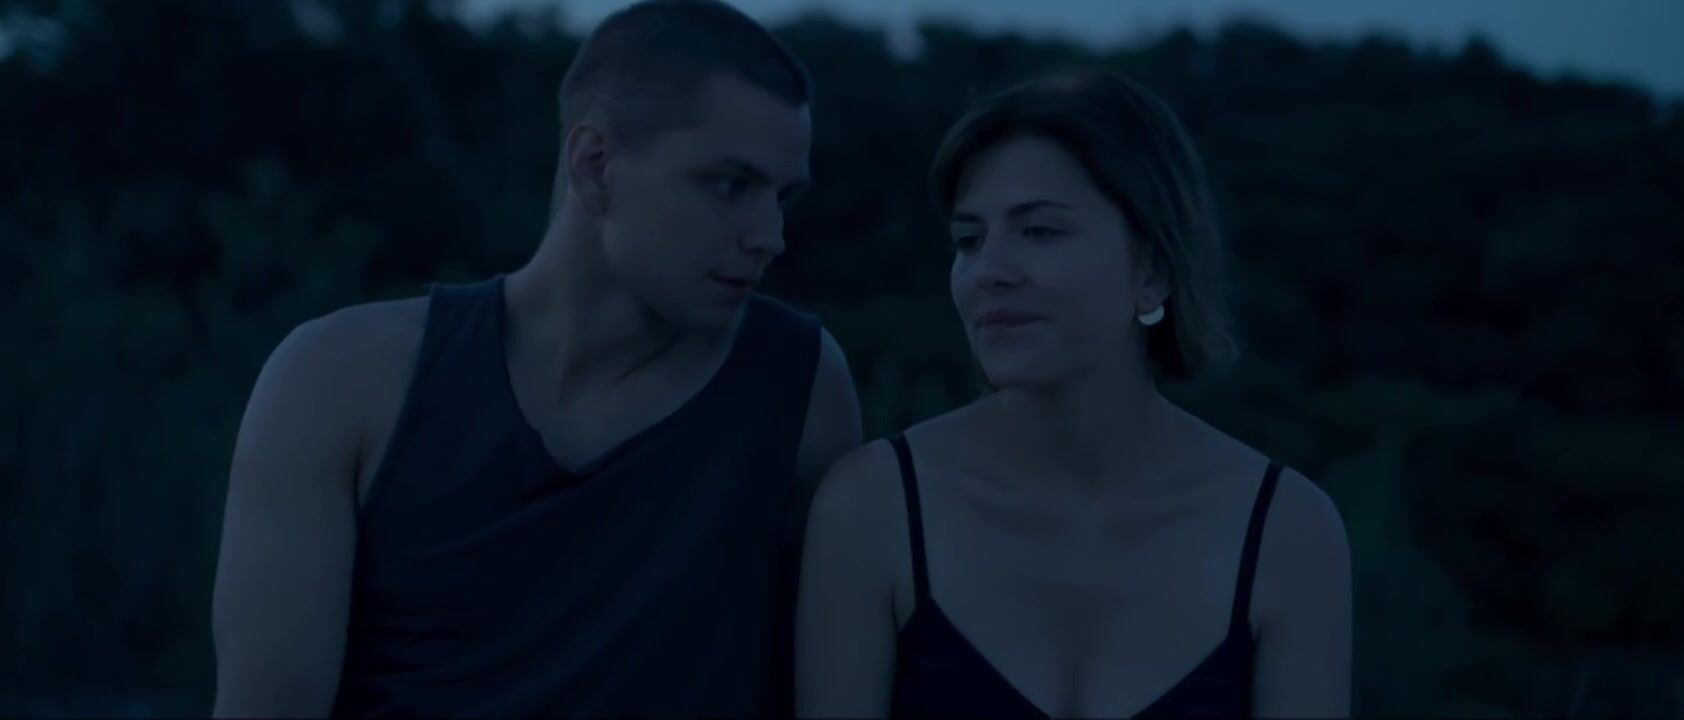 Round Ass Boy gives everything to Evgeniya Gromova just to hump her in Russian film Fidelity (2019) Chicks